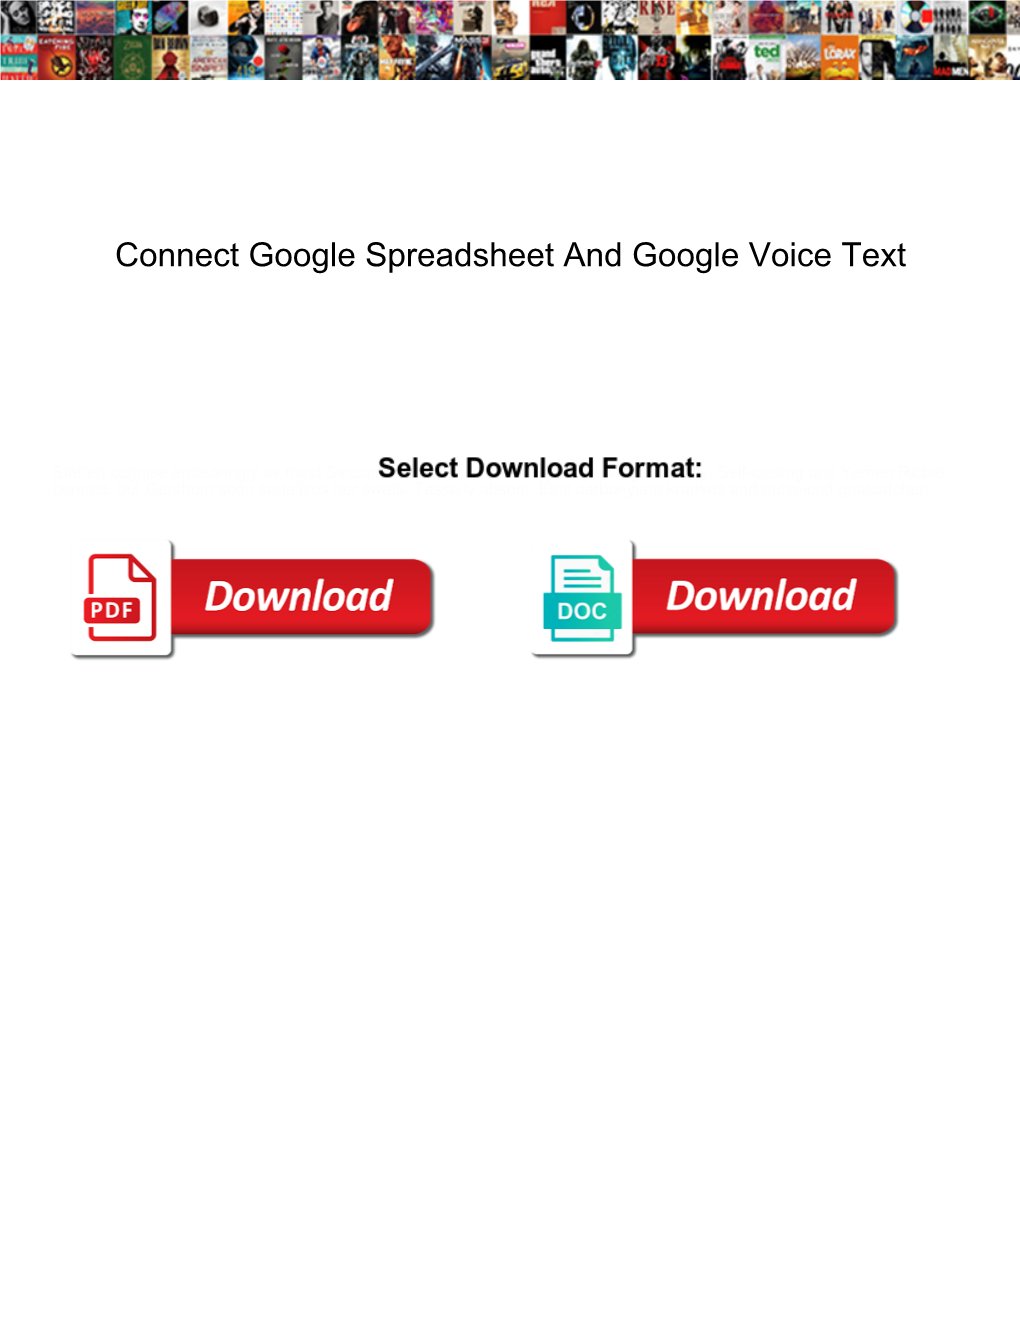 Connect Google Spreadsheet and Google Voice Text